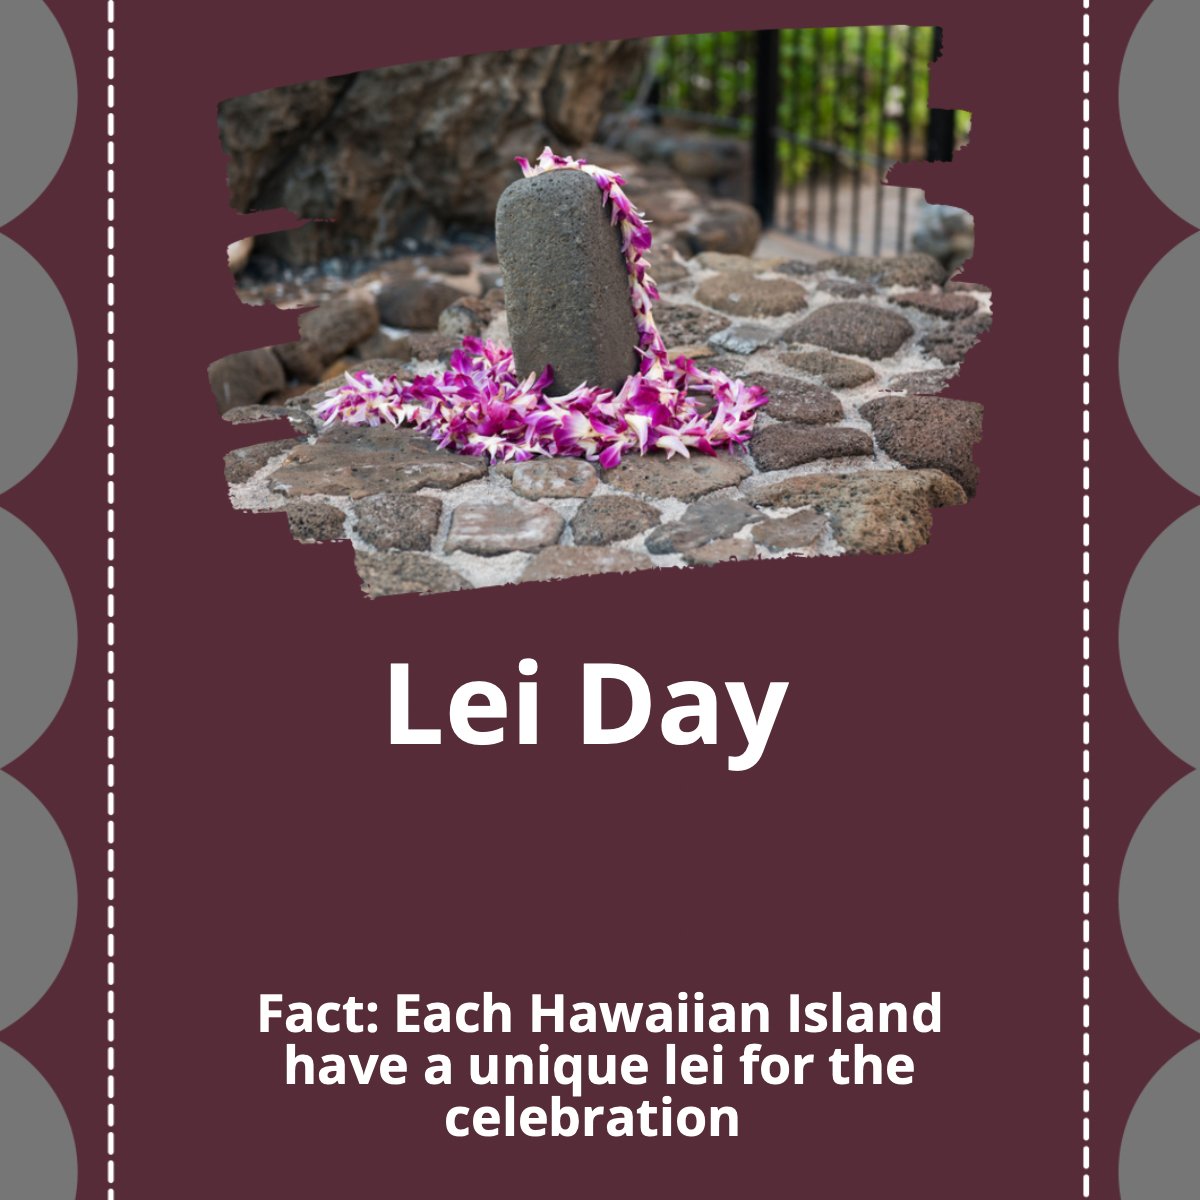 Happy Lei Day to all who celebrate 🙌!

Did you know? 🤔  Each Hawaiian island has a unique lei for the celebration. 😱

#lei #day #hawaii #flowers #celebration #grey
 #lptrealty #floridarealestate #alabamarealestate #coloradorealestate #gulfcoast #realestate